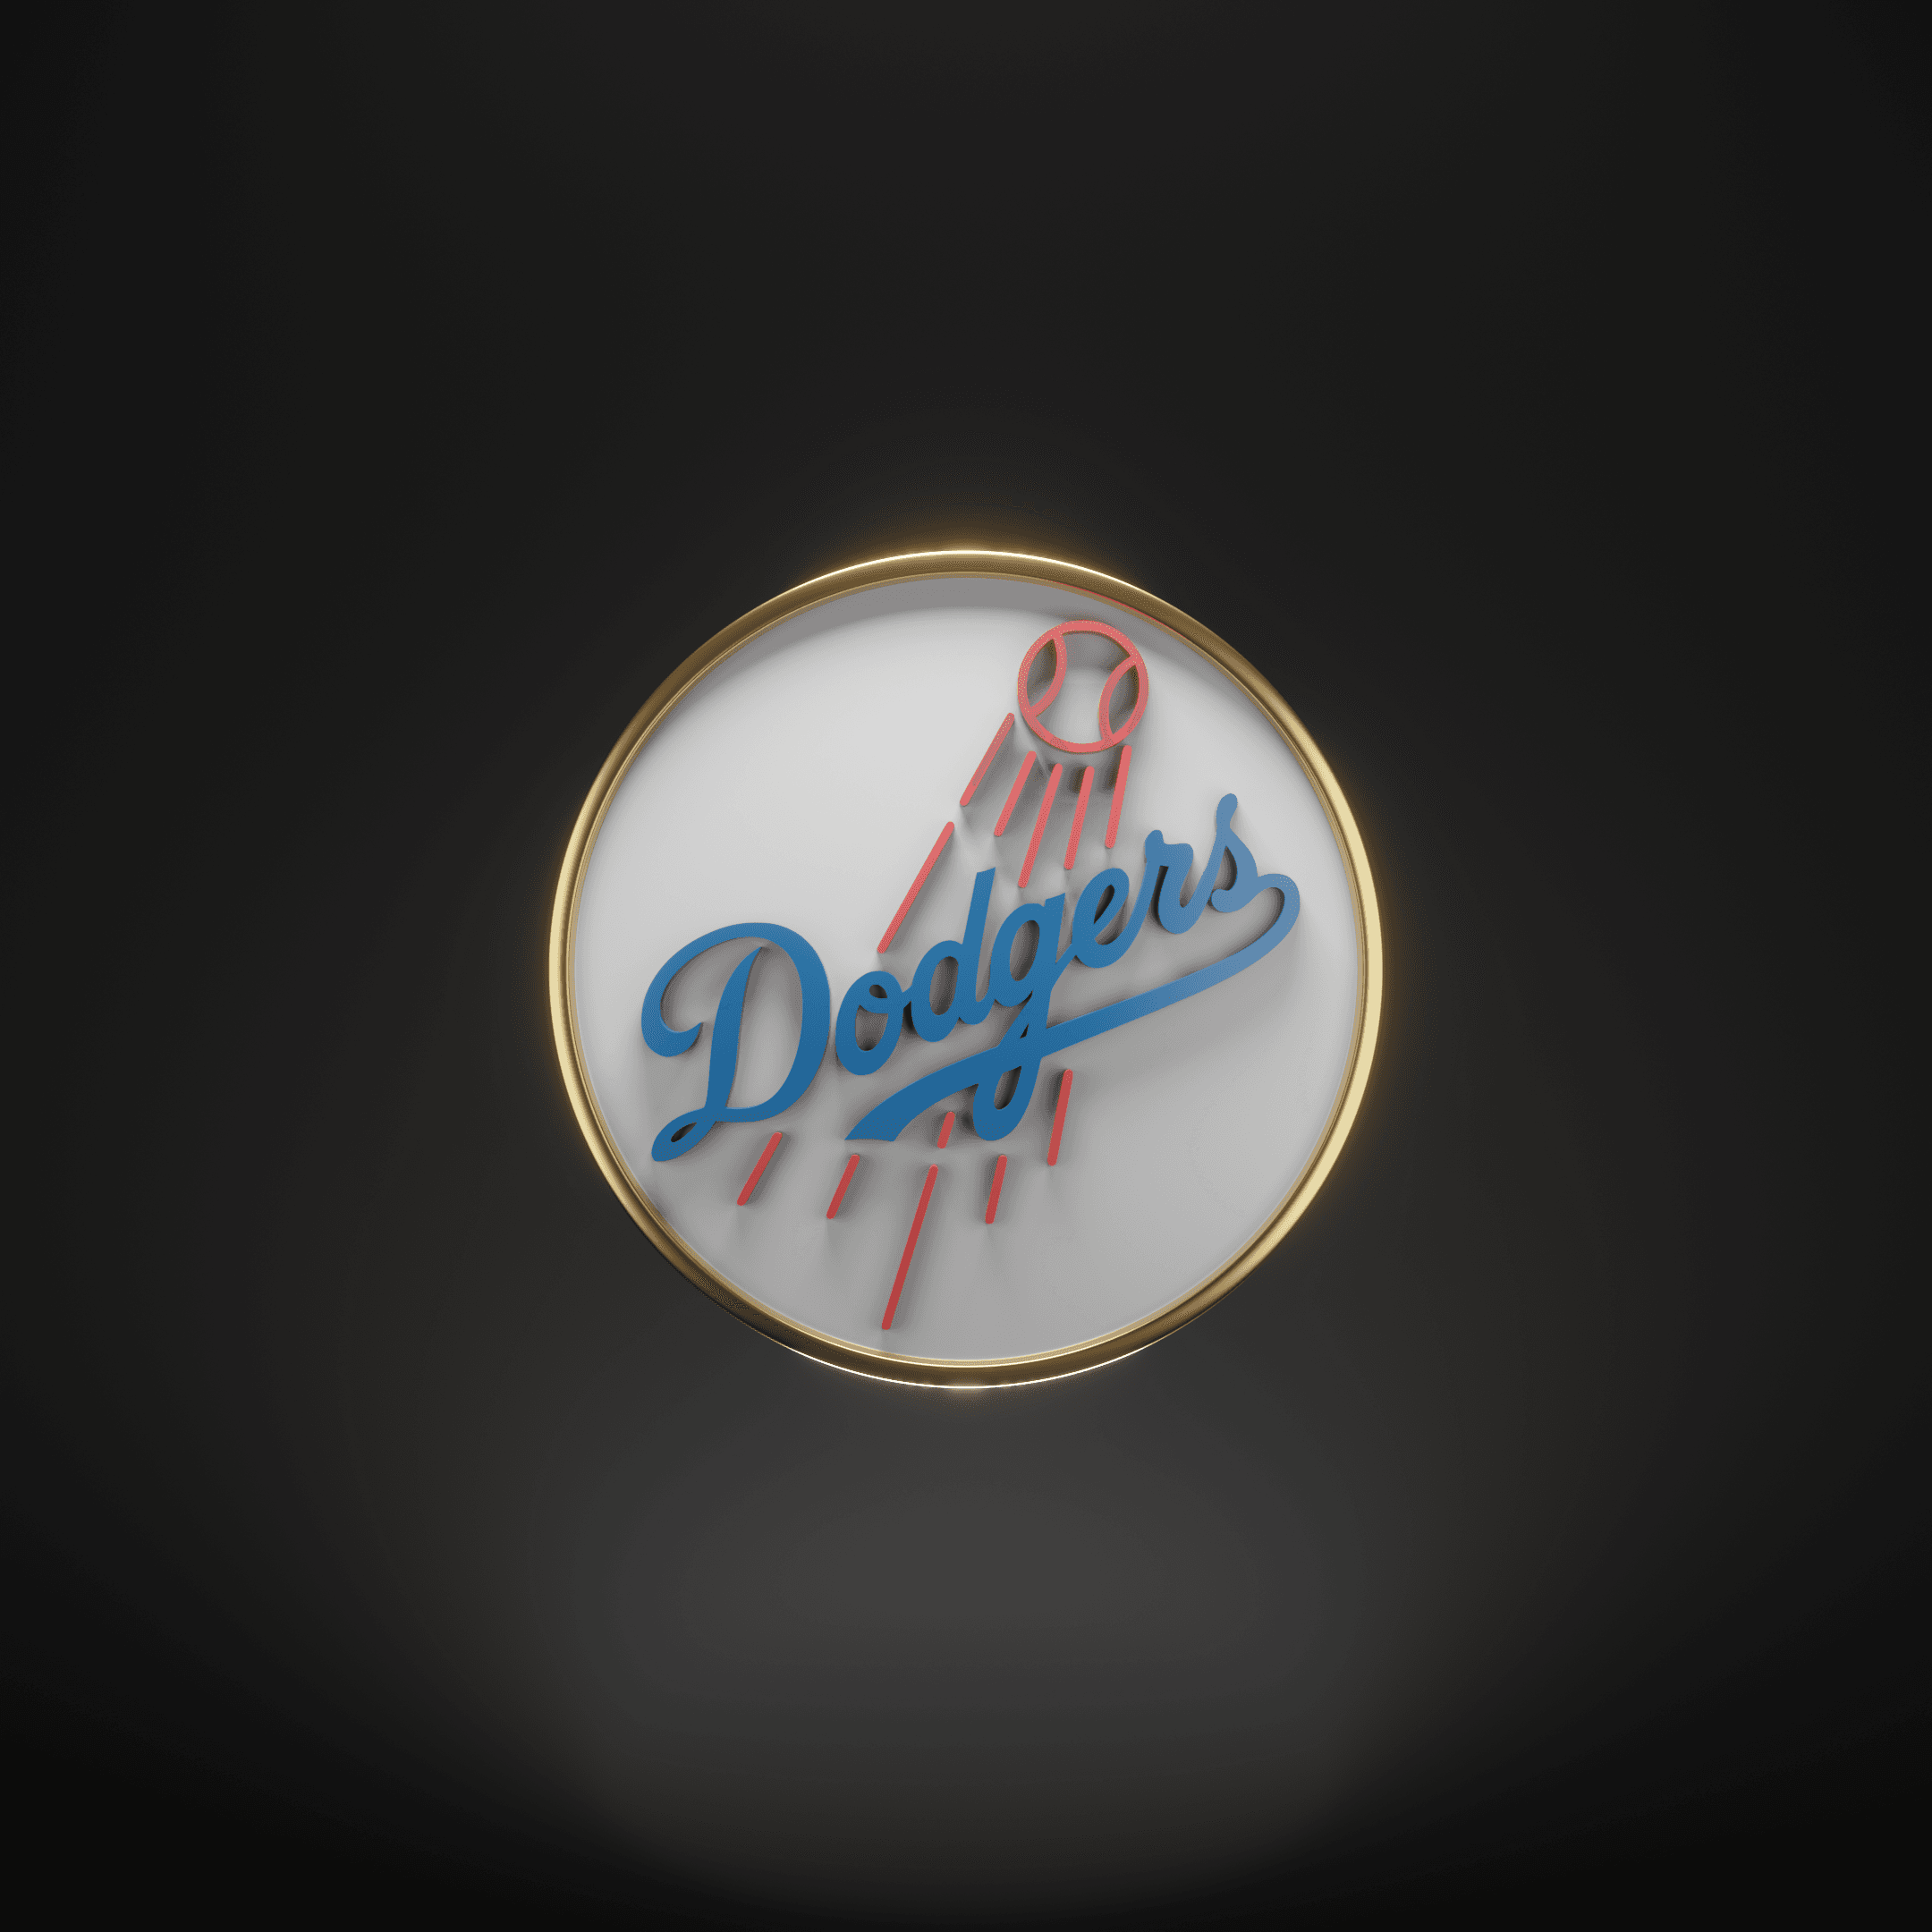 Dodgers World Series Champions Medal #1363/1687